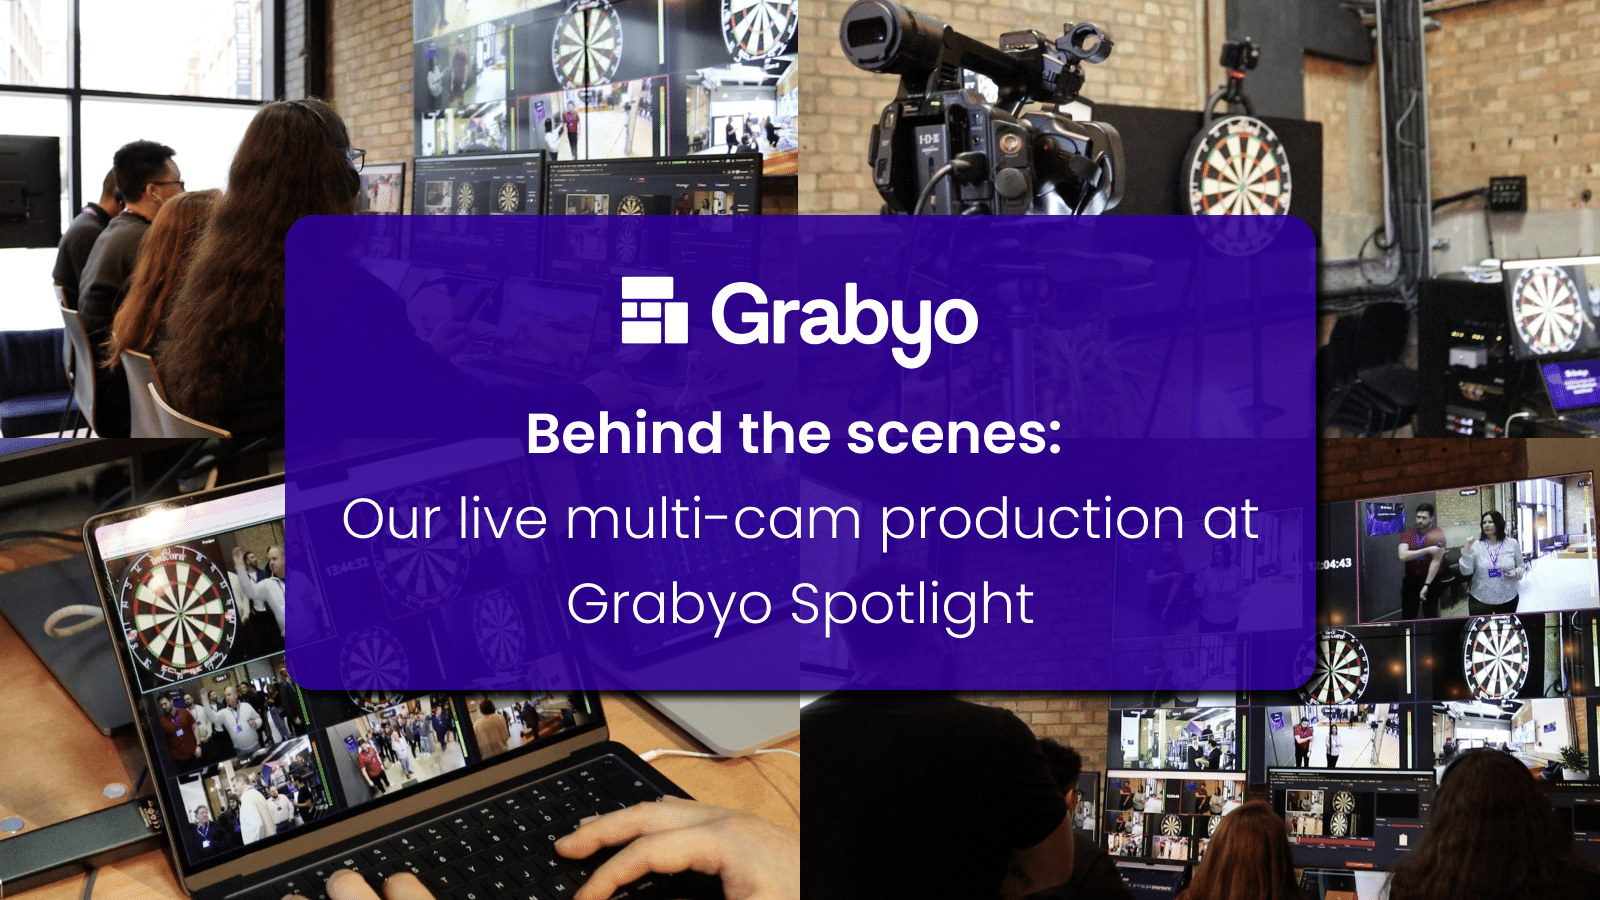 Multi-cam-production: Behind the scenes at Grabyo Spotlight